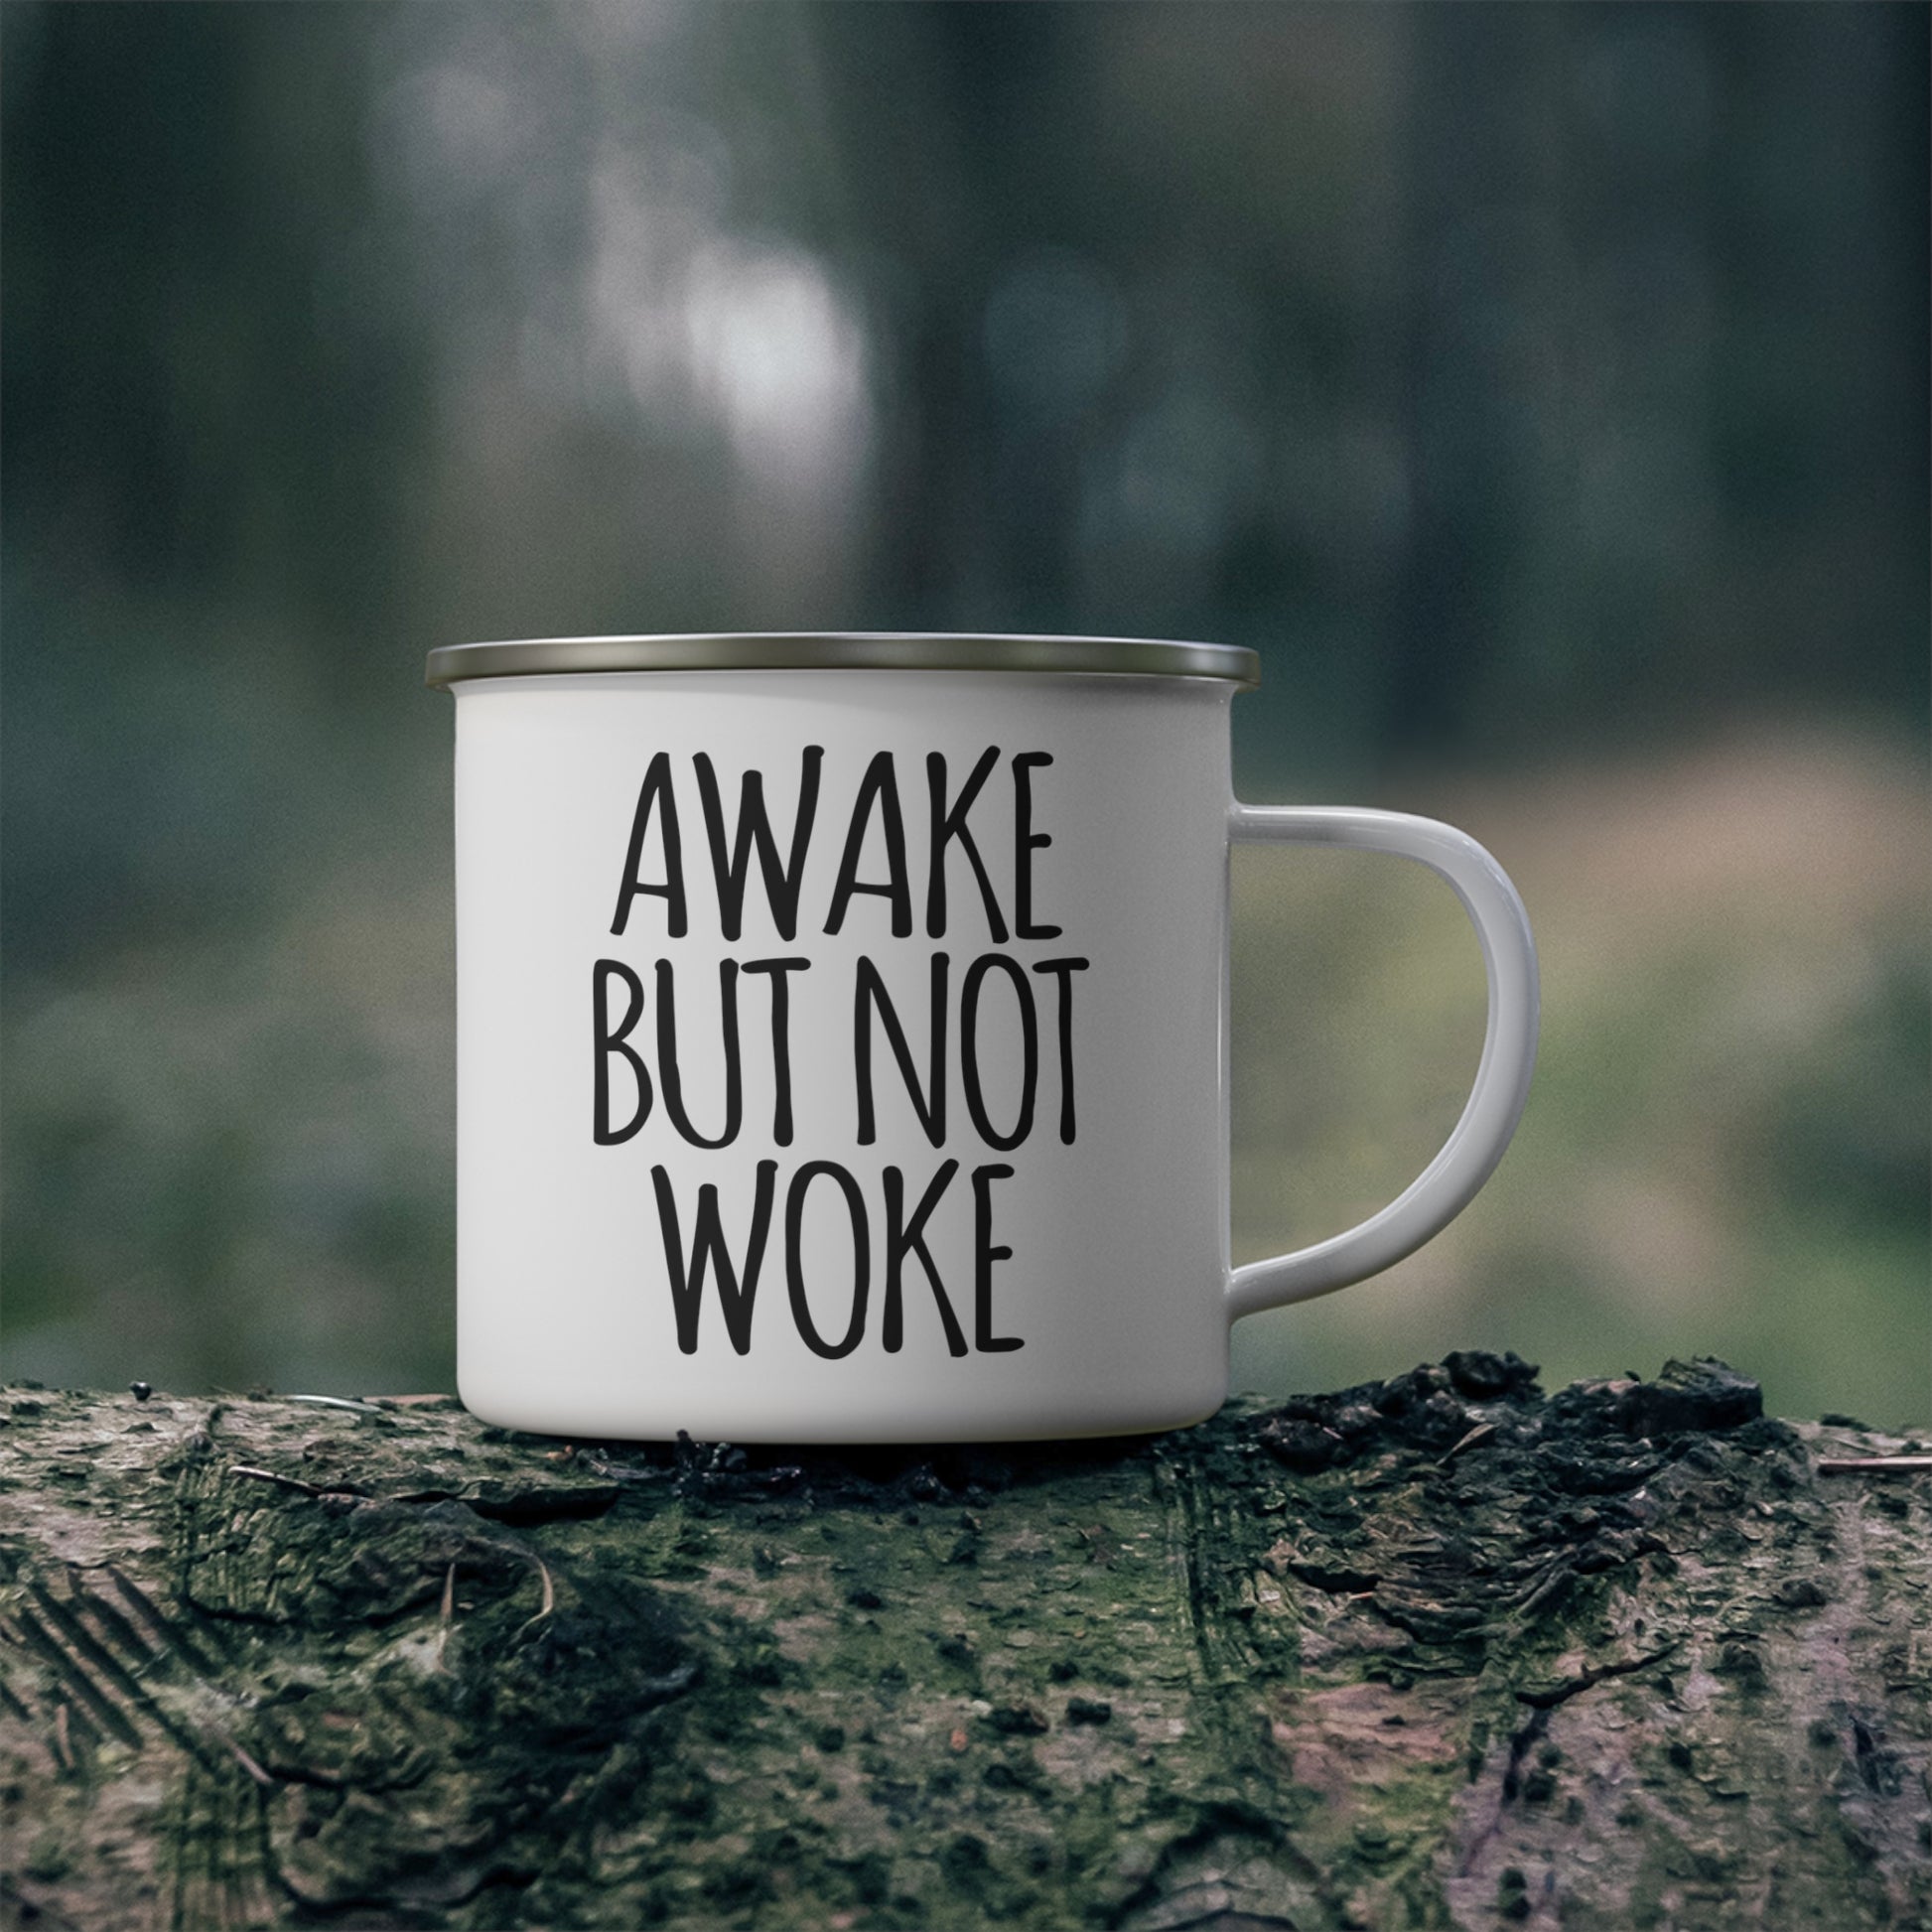 "Awake But Not Woke" Funny Political Humor Mug, Sarcastic Coffee Mug, Unique Quote Cup, Gift for Friends, Office Humor, Gag Gift - News For Reasonable People